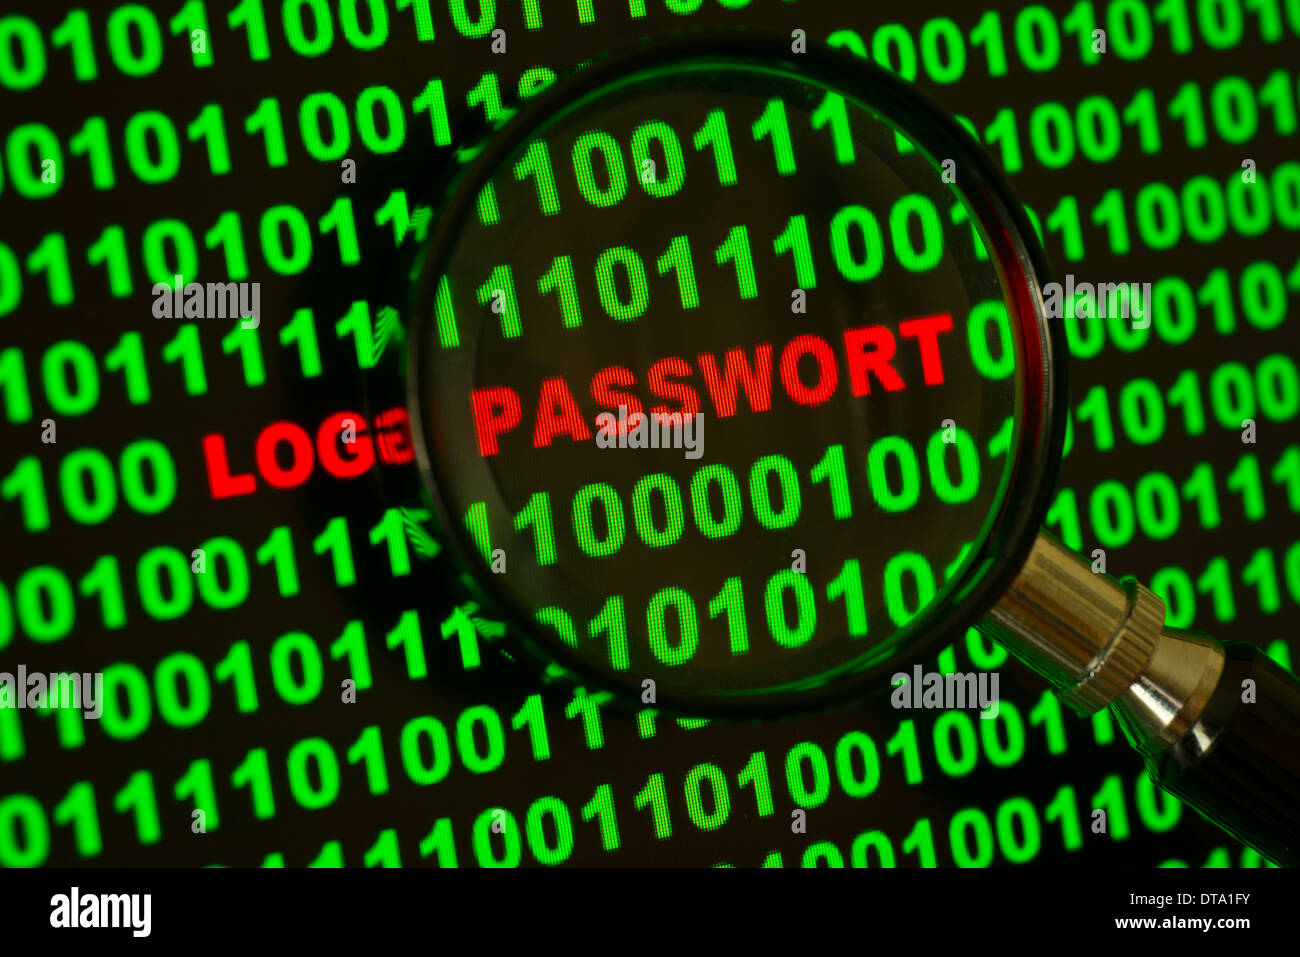 Binary code with the words 'Login Passwort' viewed through a magnifying glass Stock Photo